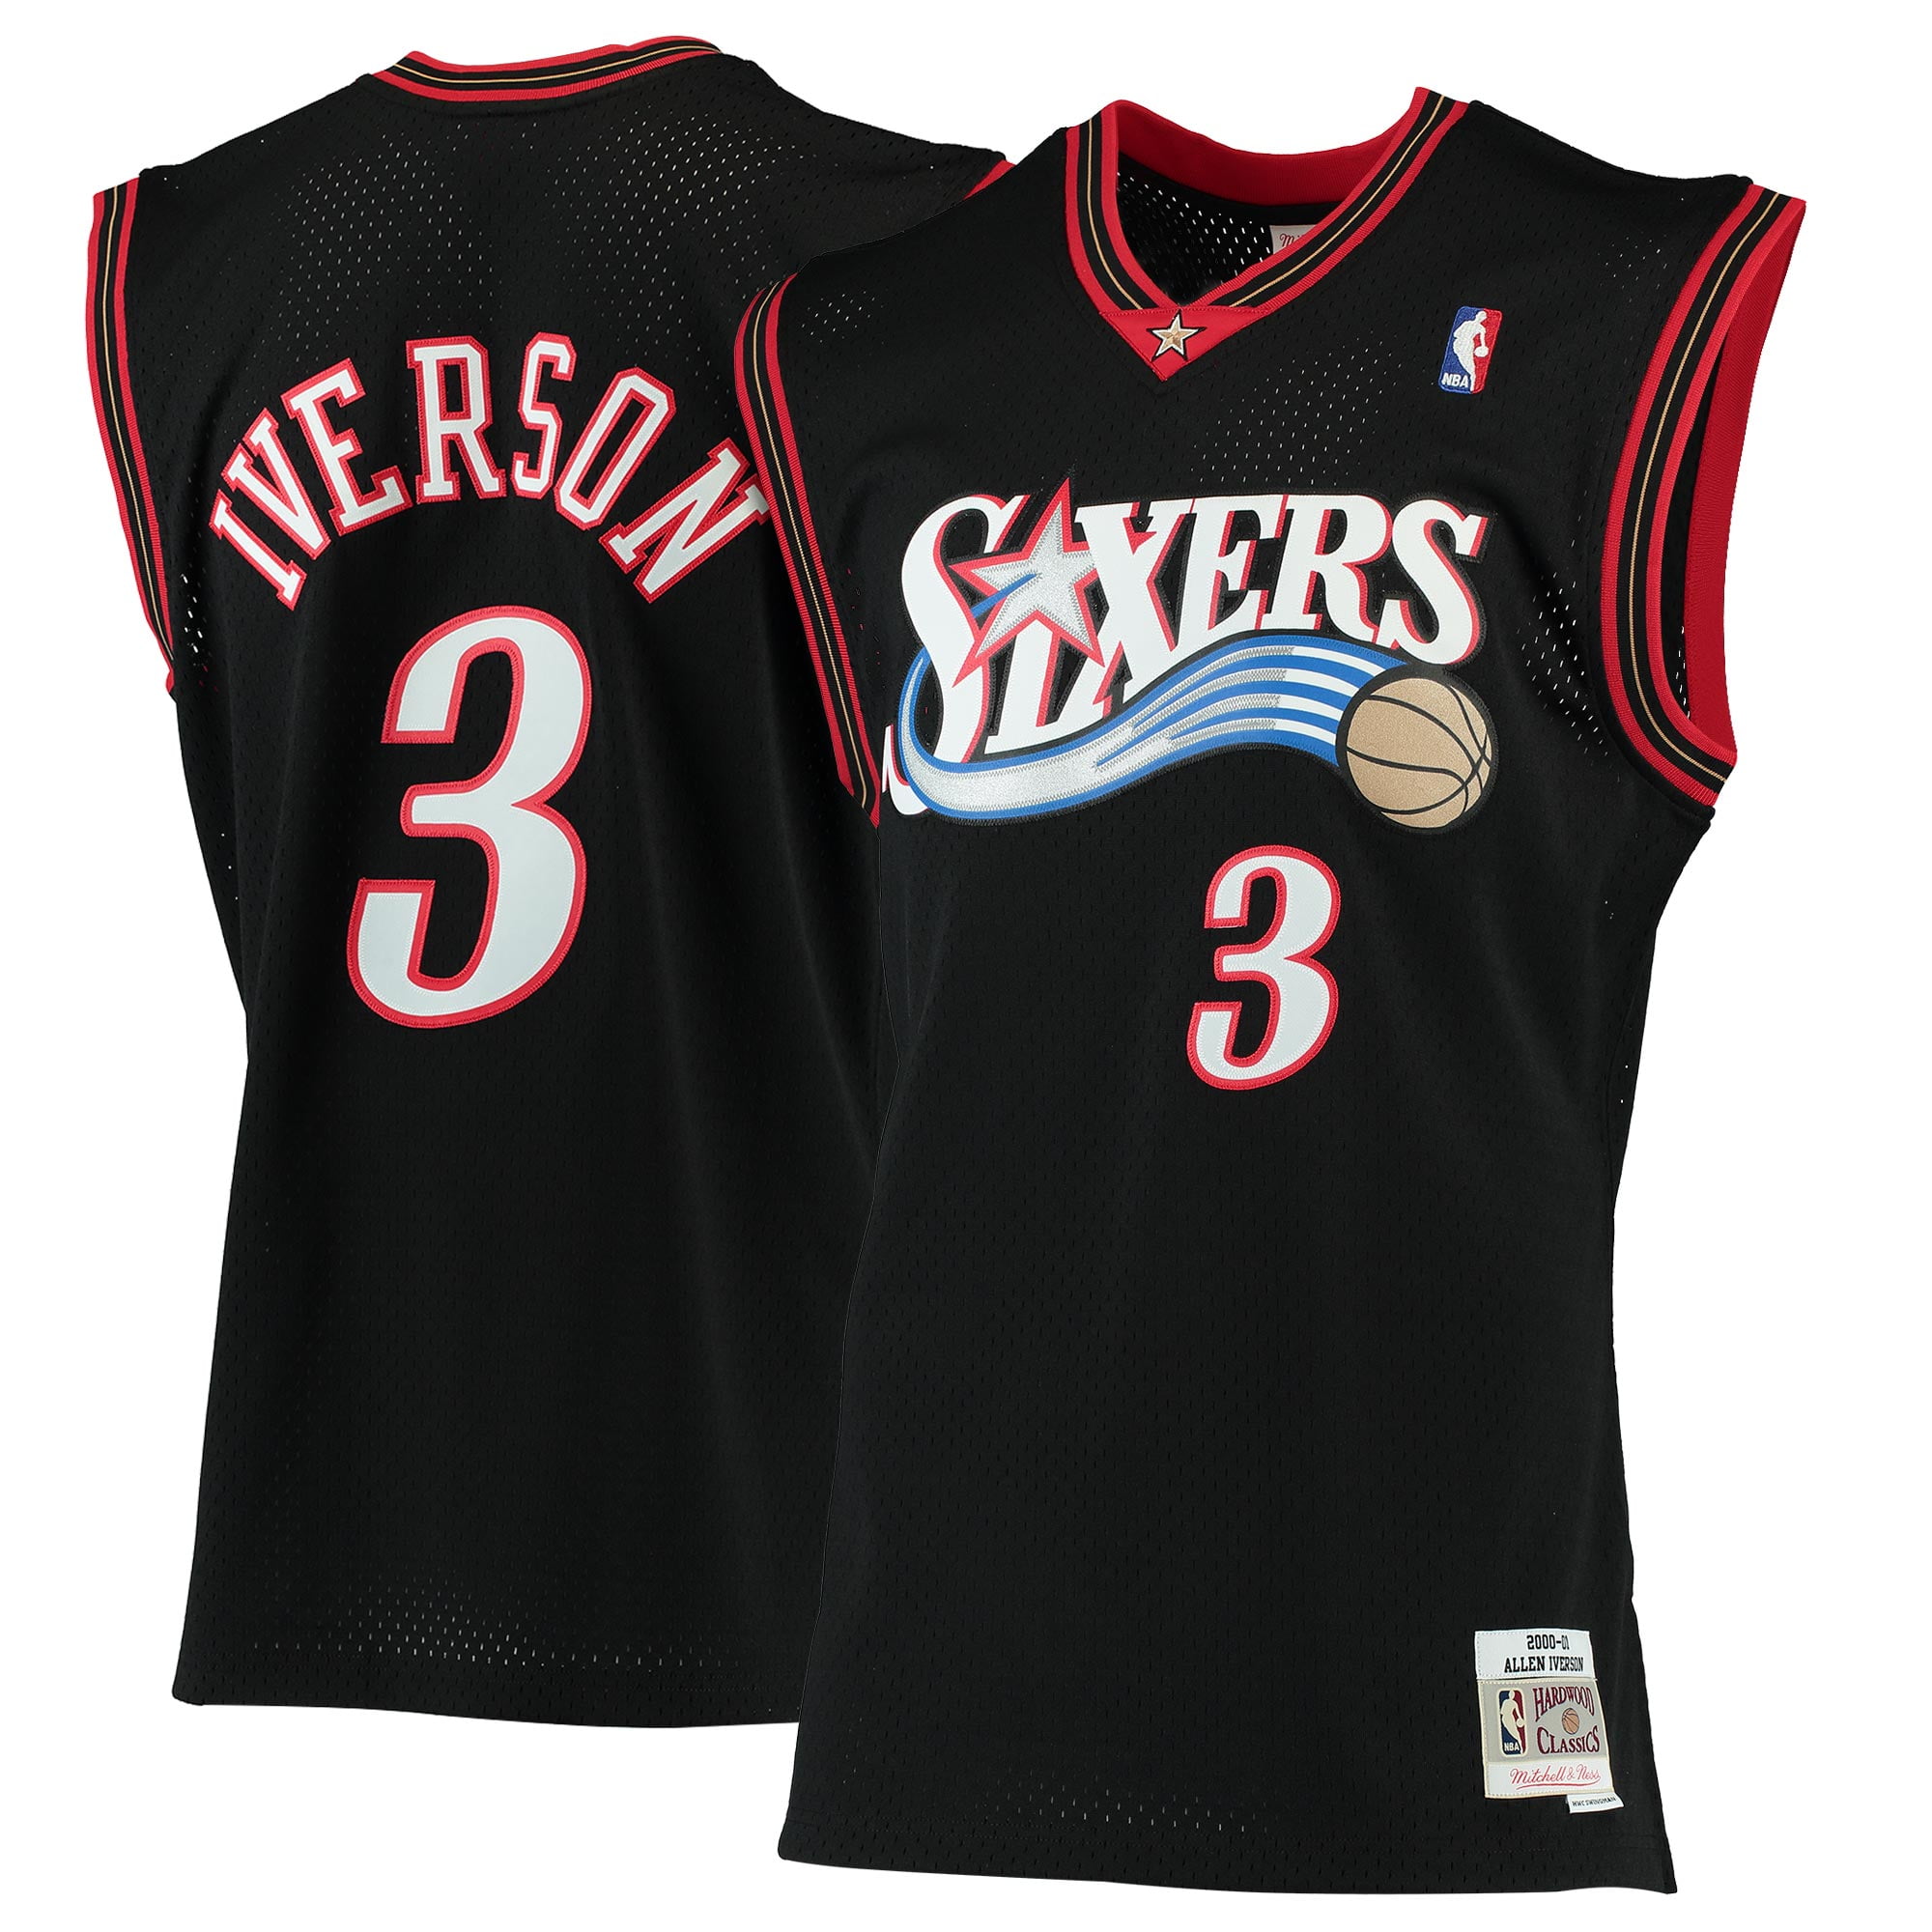 floral iverson jersey